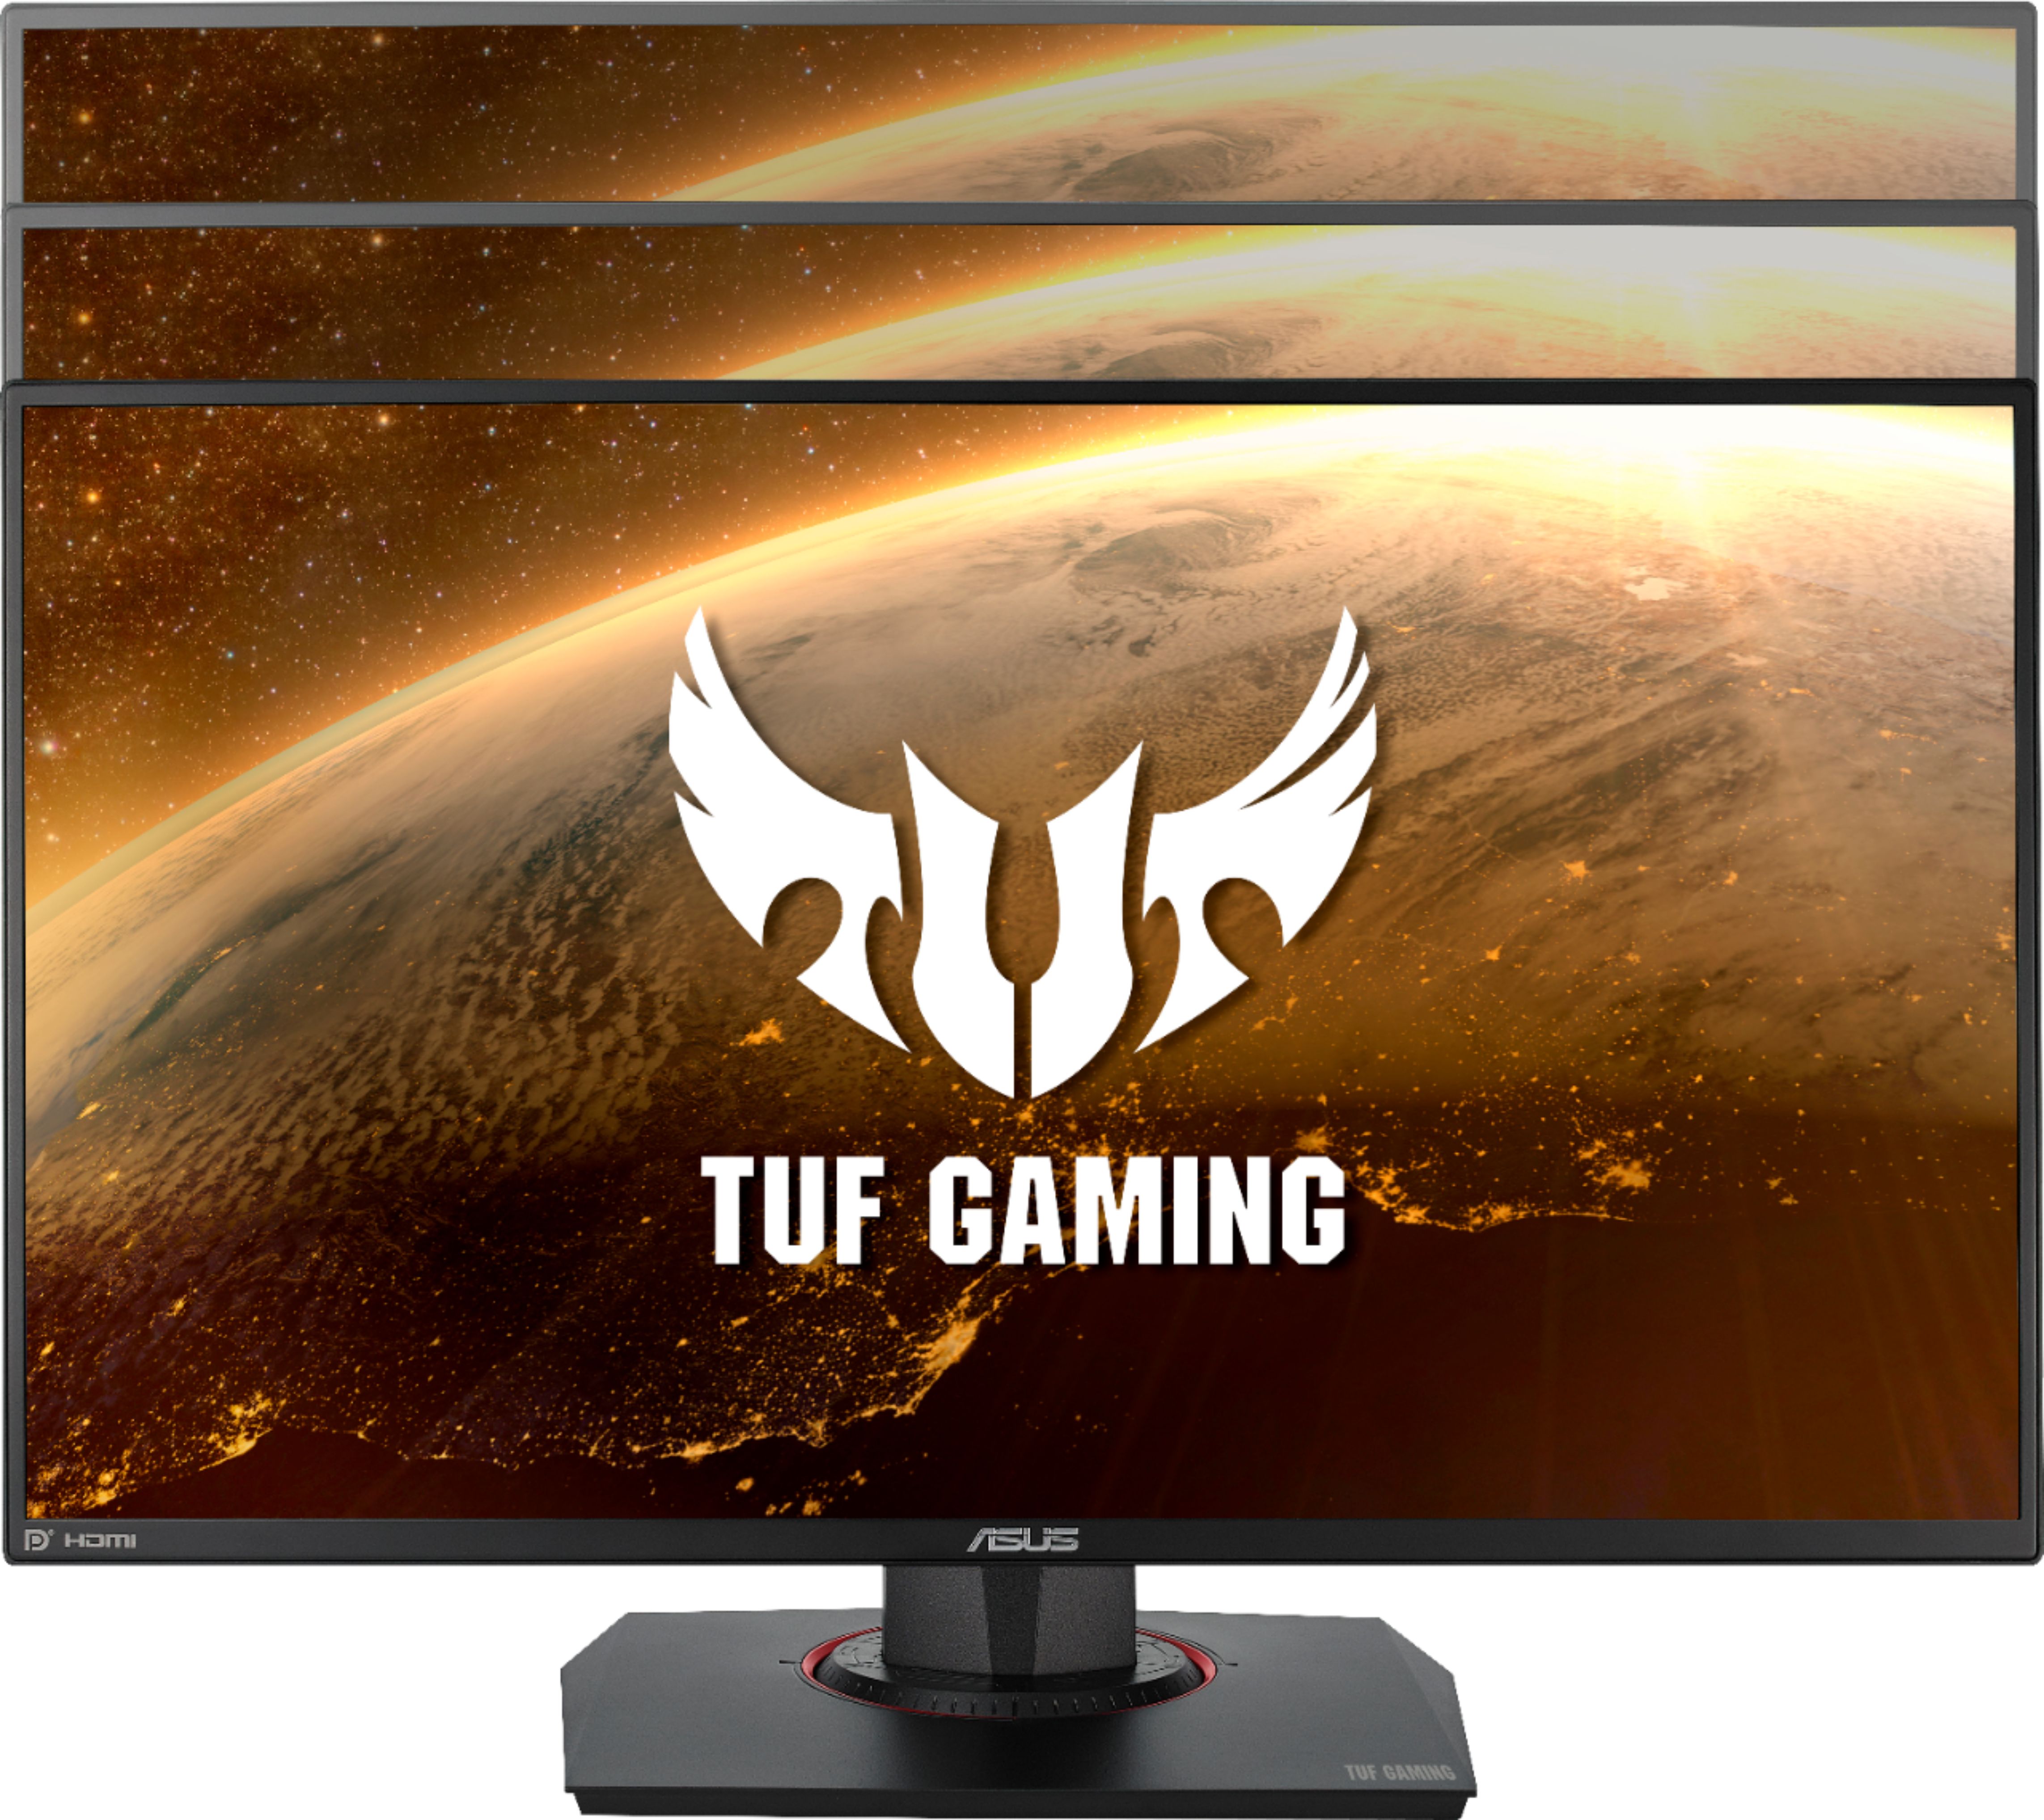 Angle View: ASUS - Geek Squad Certified Refurbished TUF Gaming 24.5" IPS LED FHD G-SYNC Monitor with HDR - Black